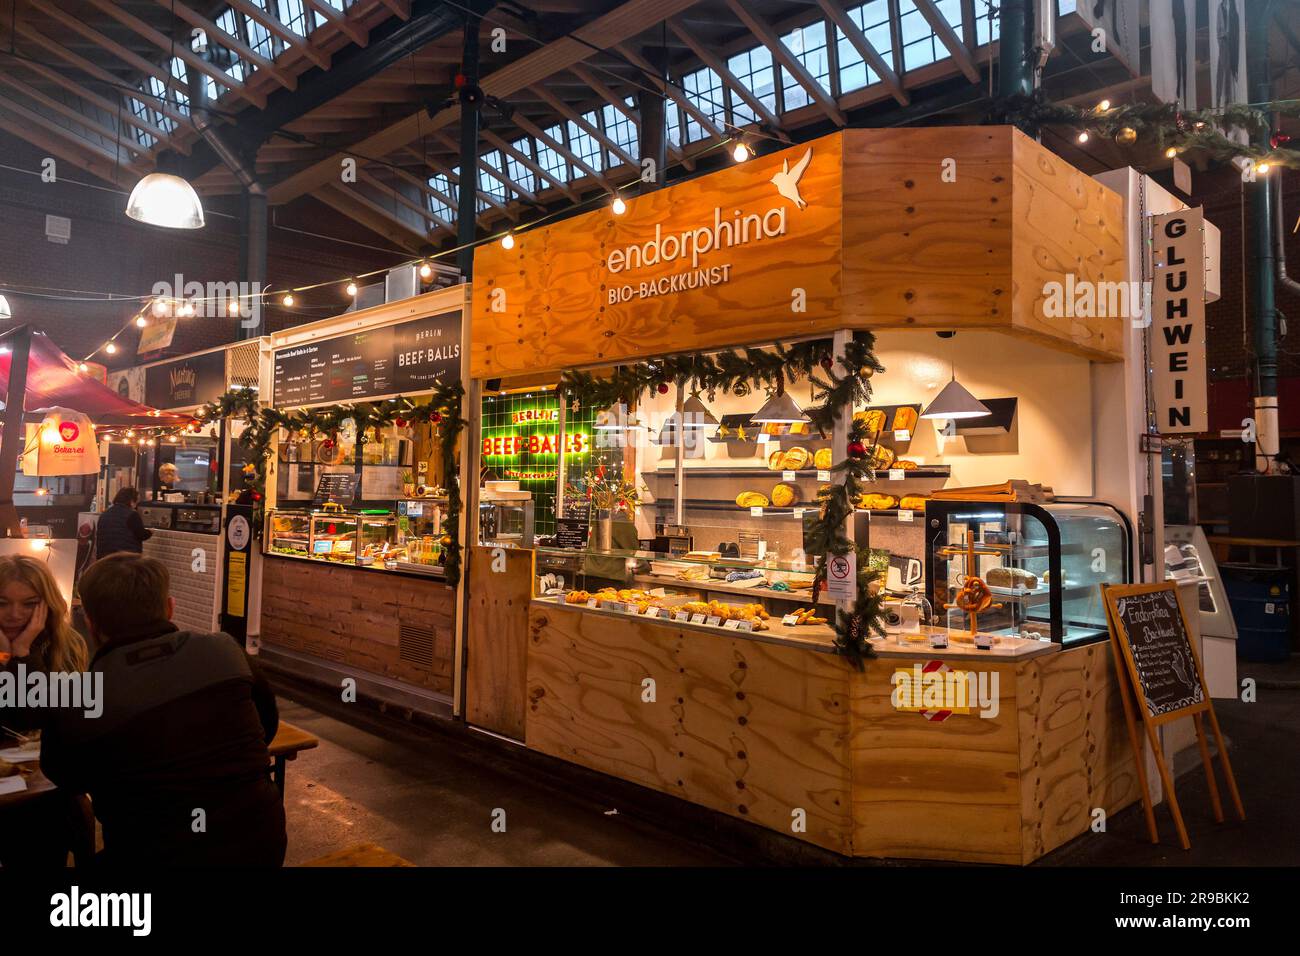 Berlin, Germany - 17 DEC 2021: Markthalle Neun is an indoor market with international food vendors & shops, plus occasional community events, located Stock Photo